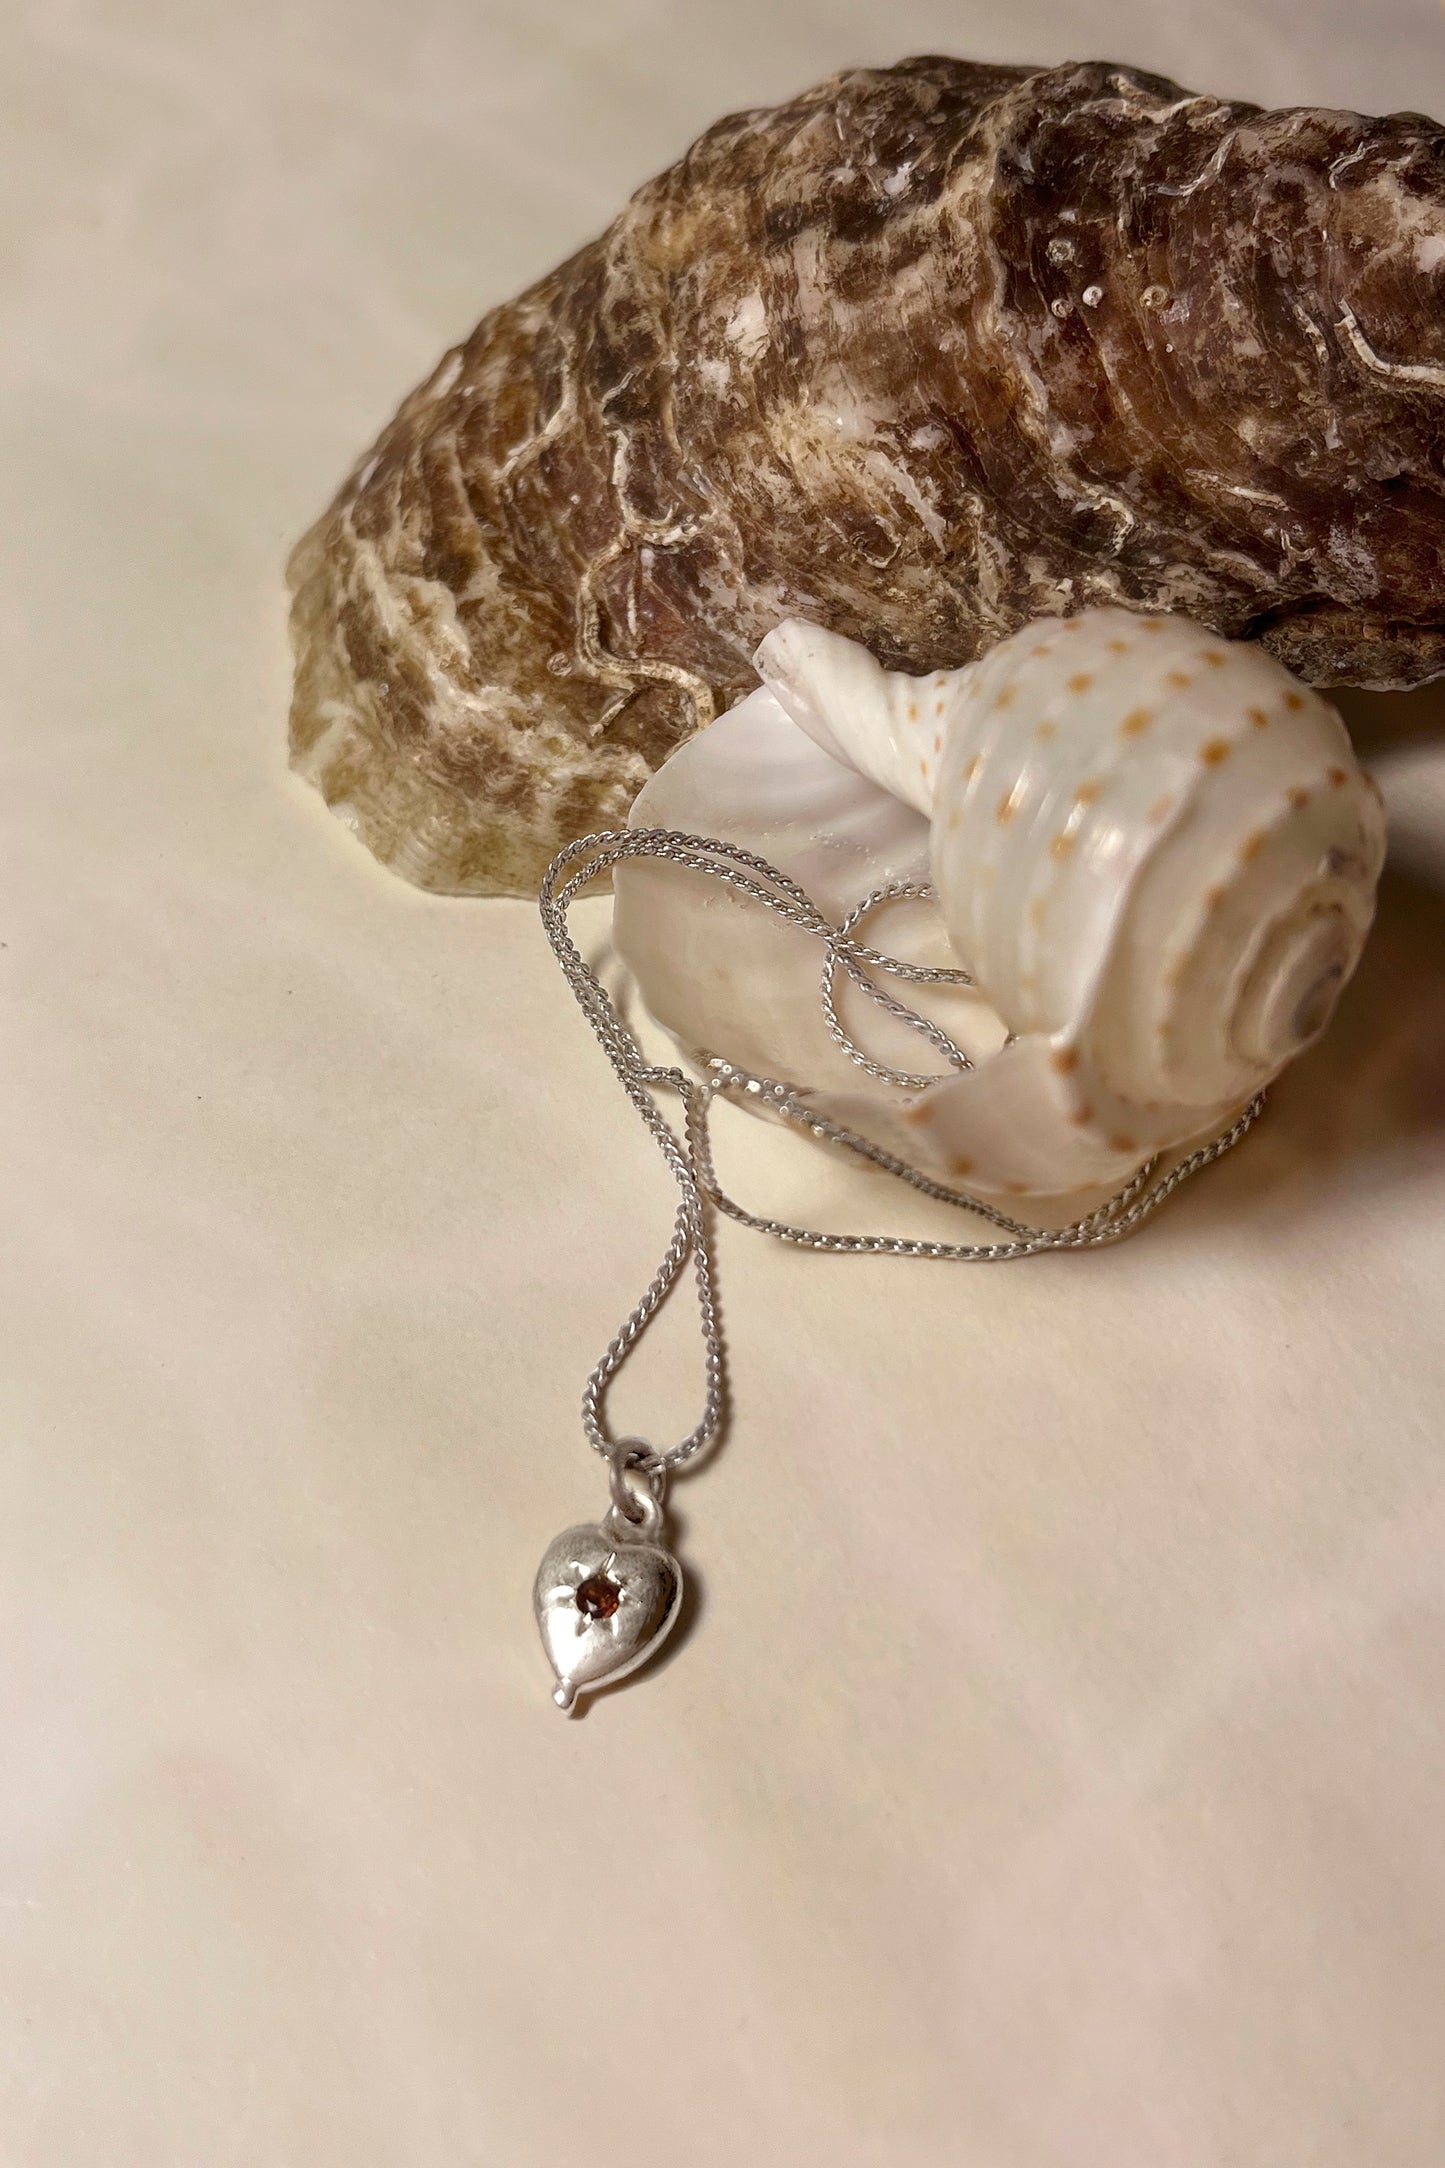 Underwater scene of Sterling Silver CLARK Tiny Heart Charm Necklace. Perfect luxury gift for a loved one, wedding or anniversary 